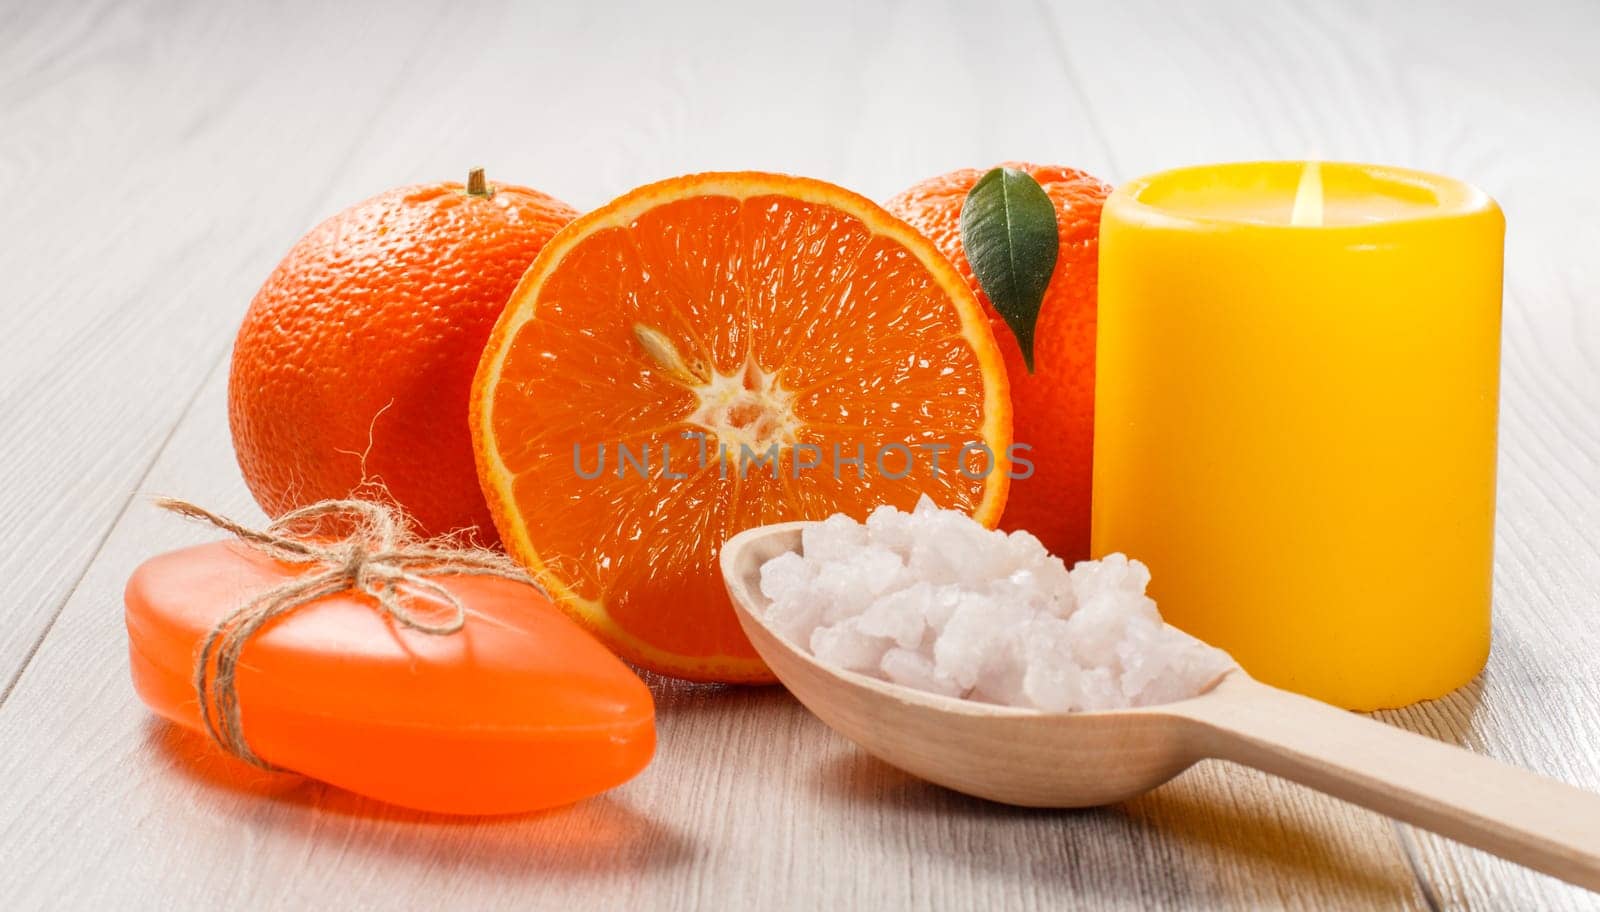 Cut orange with two whole oranges, soap, wooden spoon with white sea salt and burning yellow candle on wooden desk. Spa products and accessories.